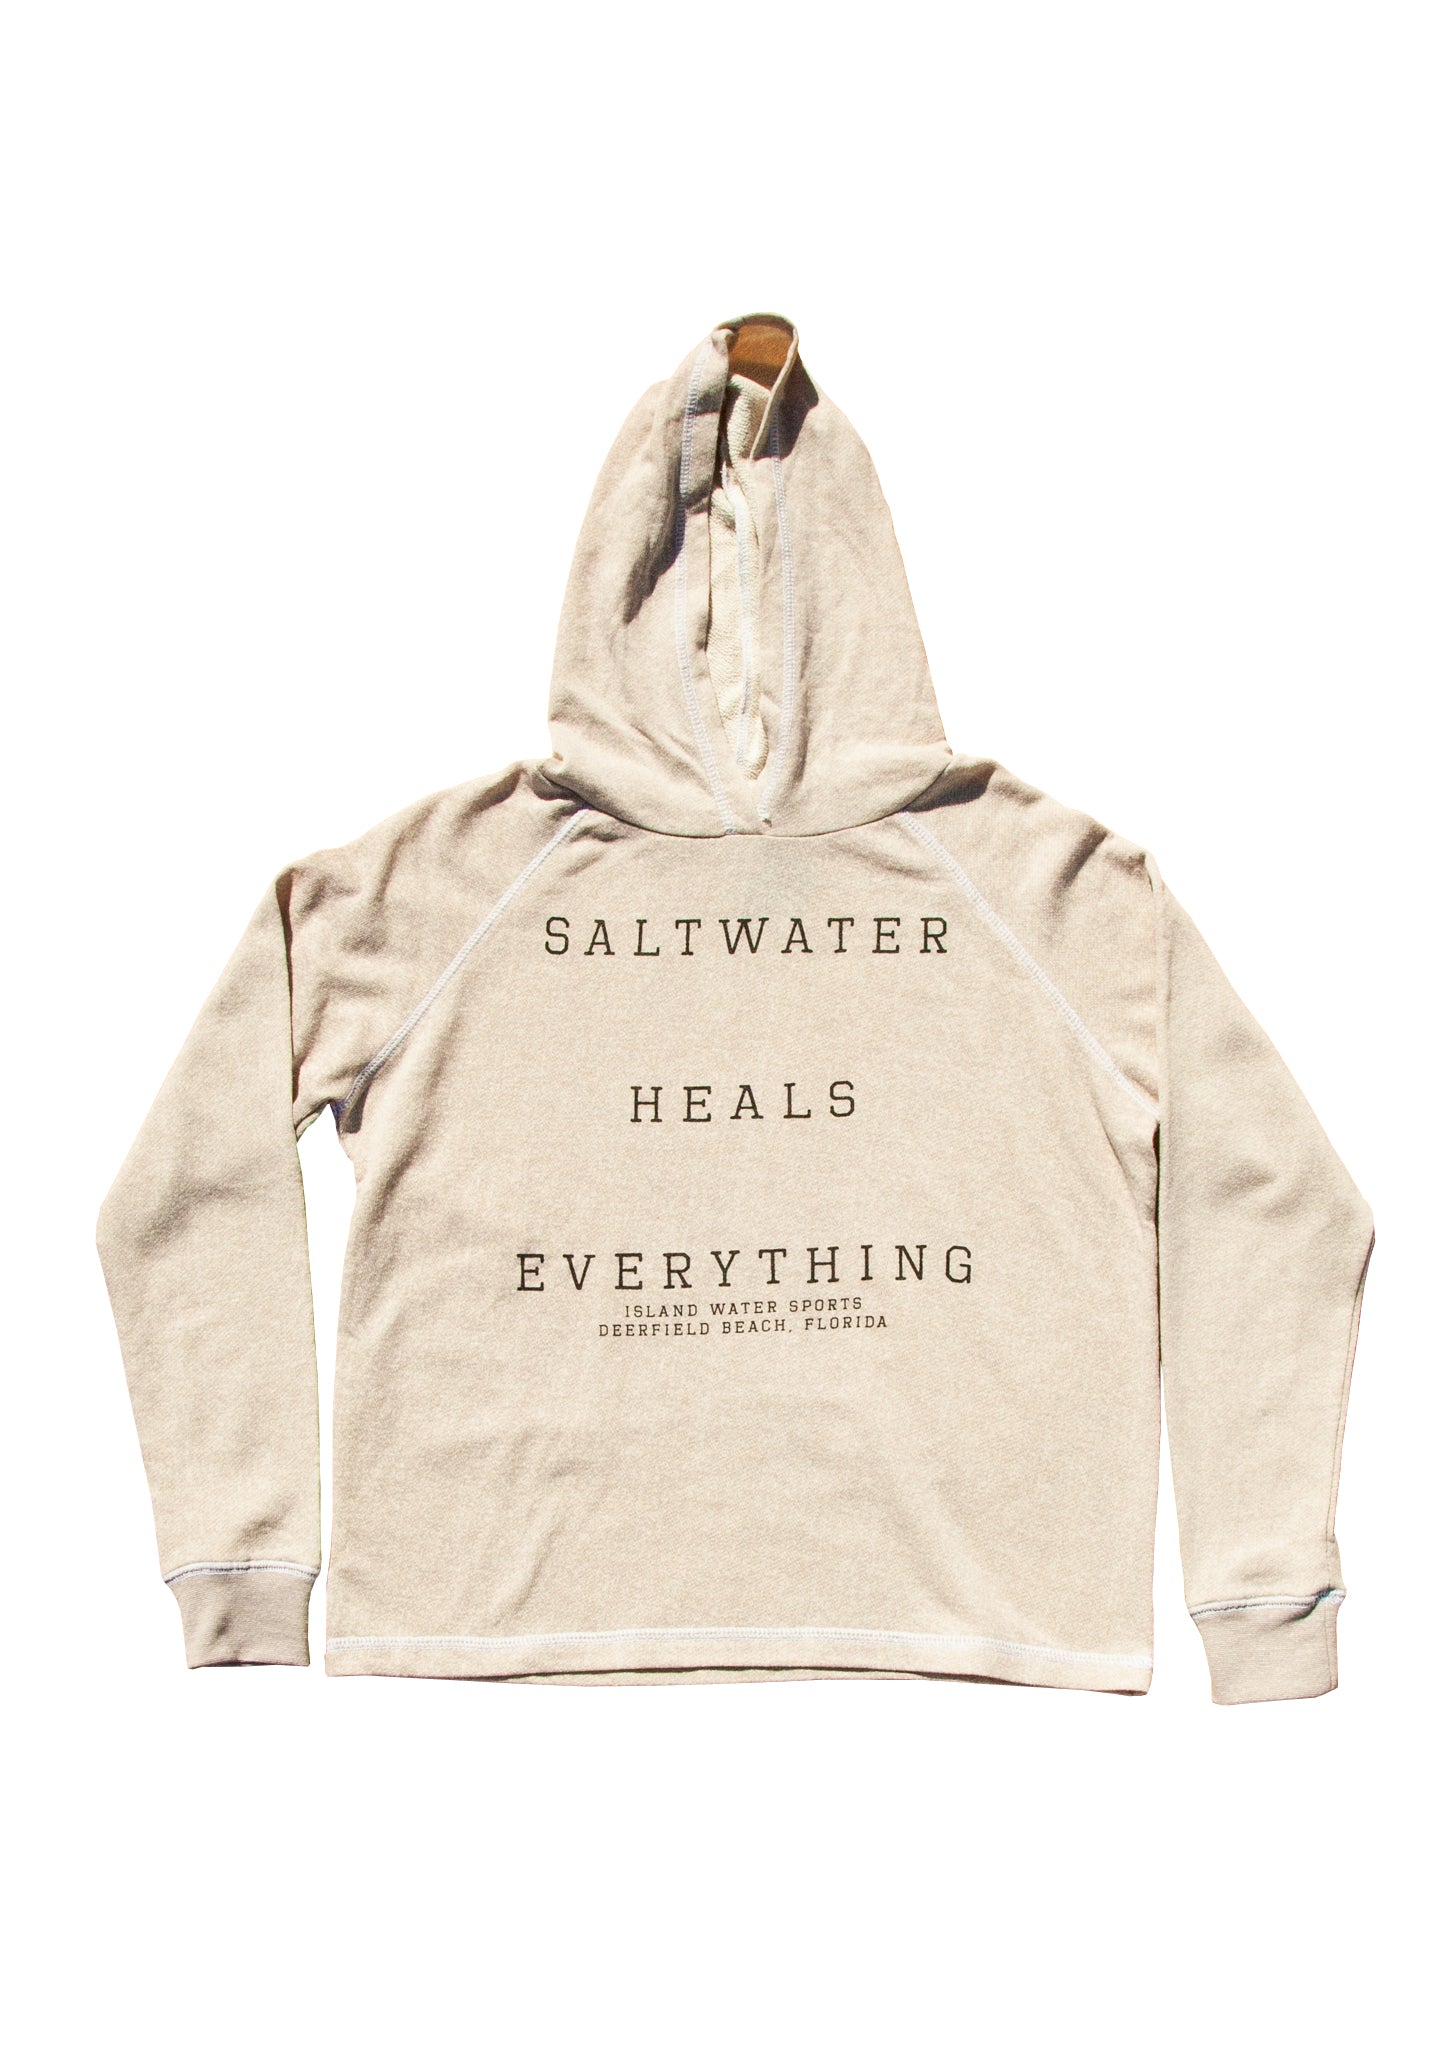 Island Water Sports Saltwater Heals Everything Terry Boxy Pullover Hoodie CC3007 LtGREY L